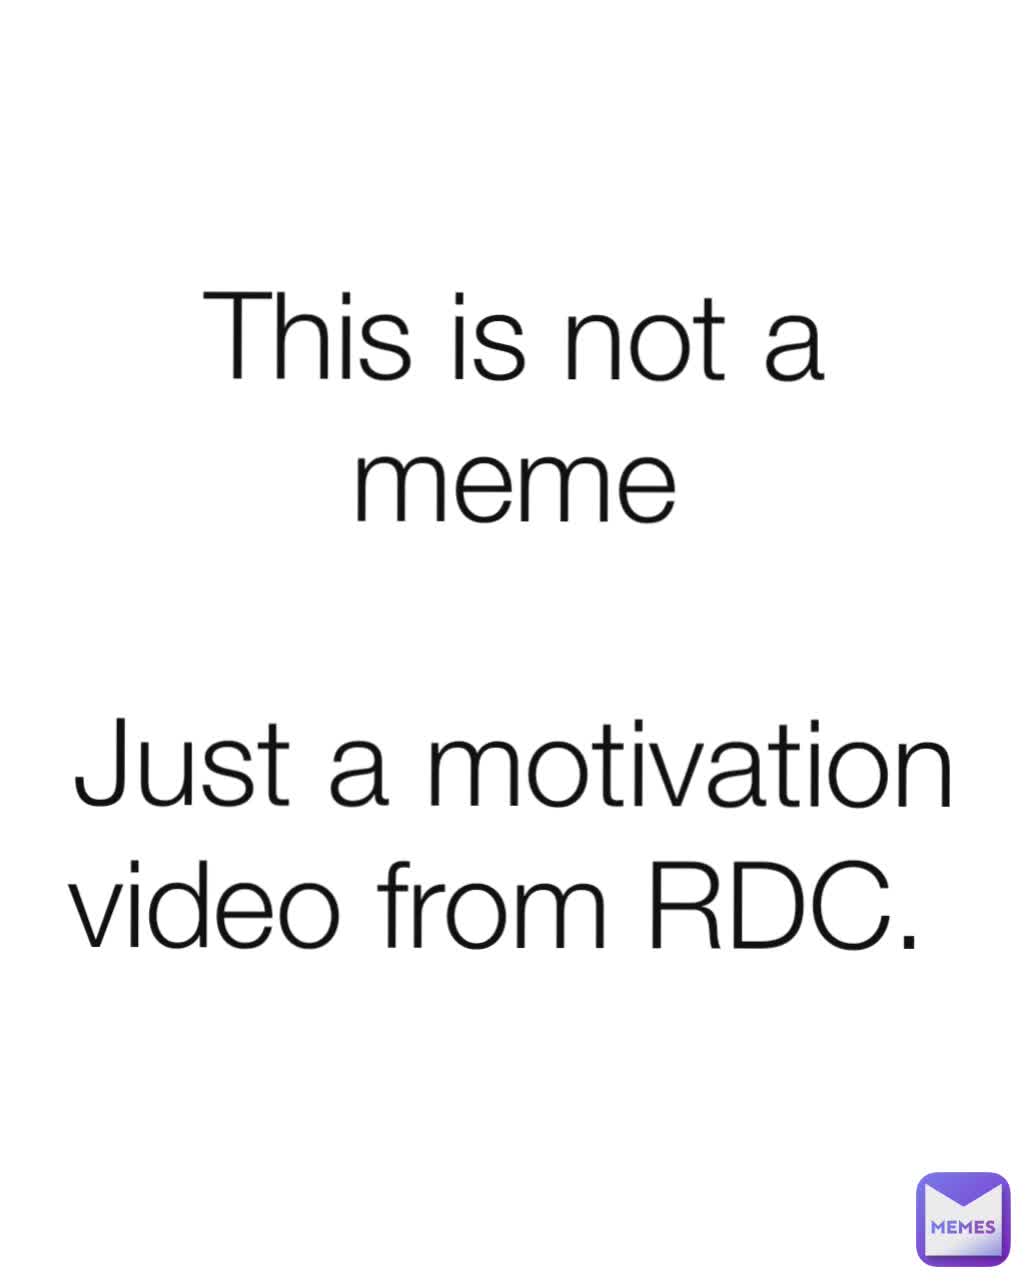 This is not a meme

Just a motivation video from RDC. 